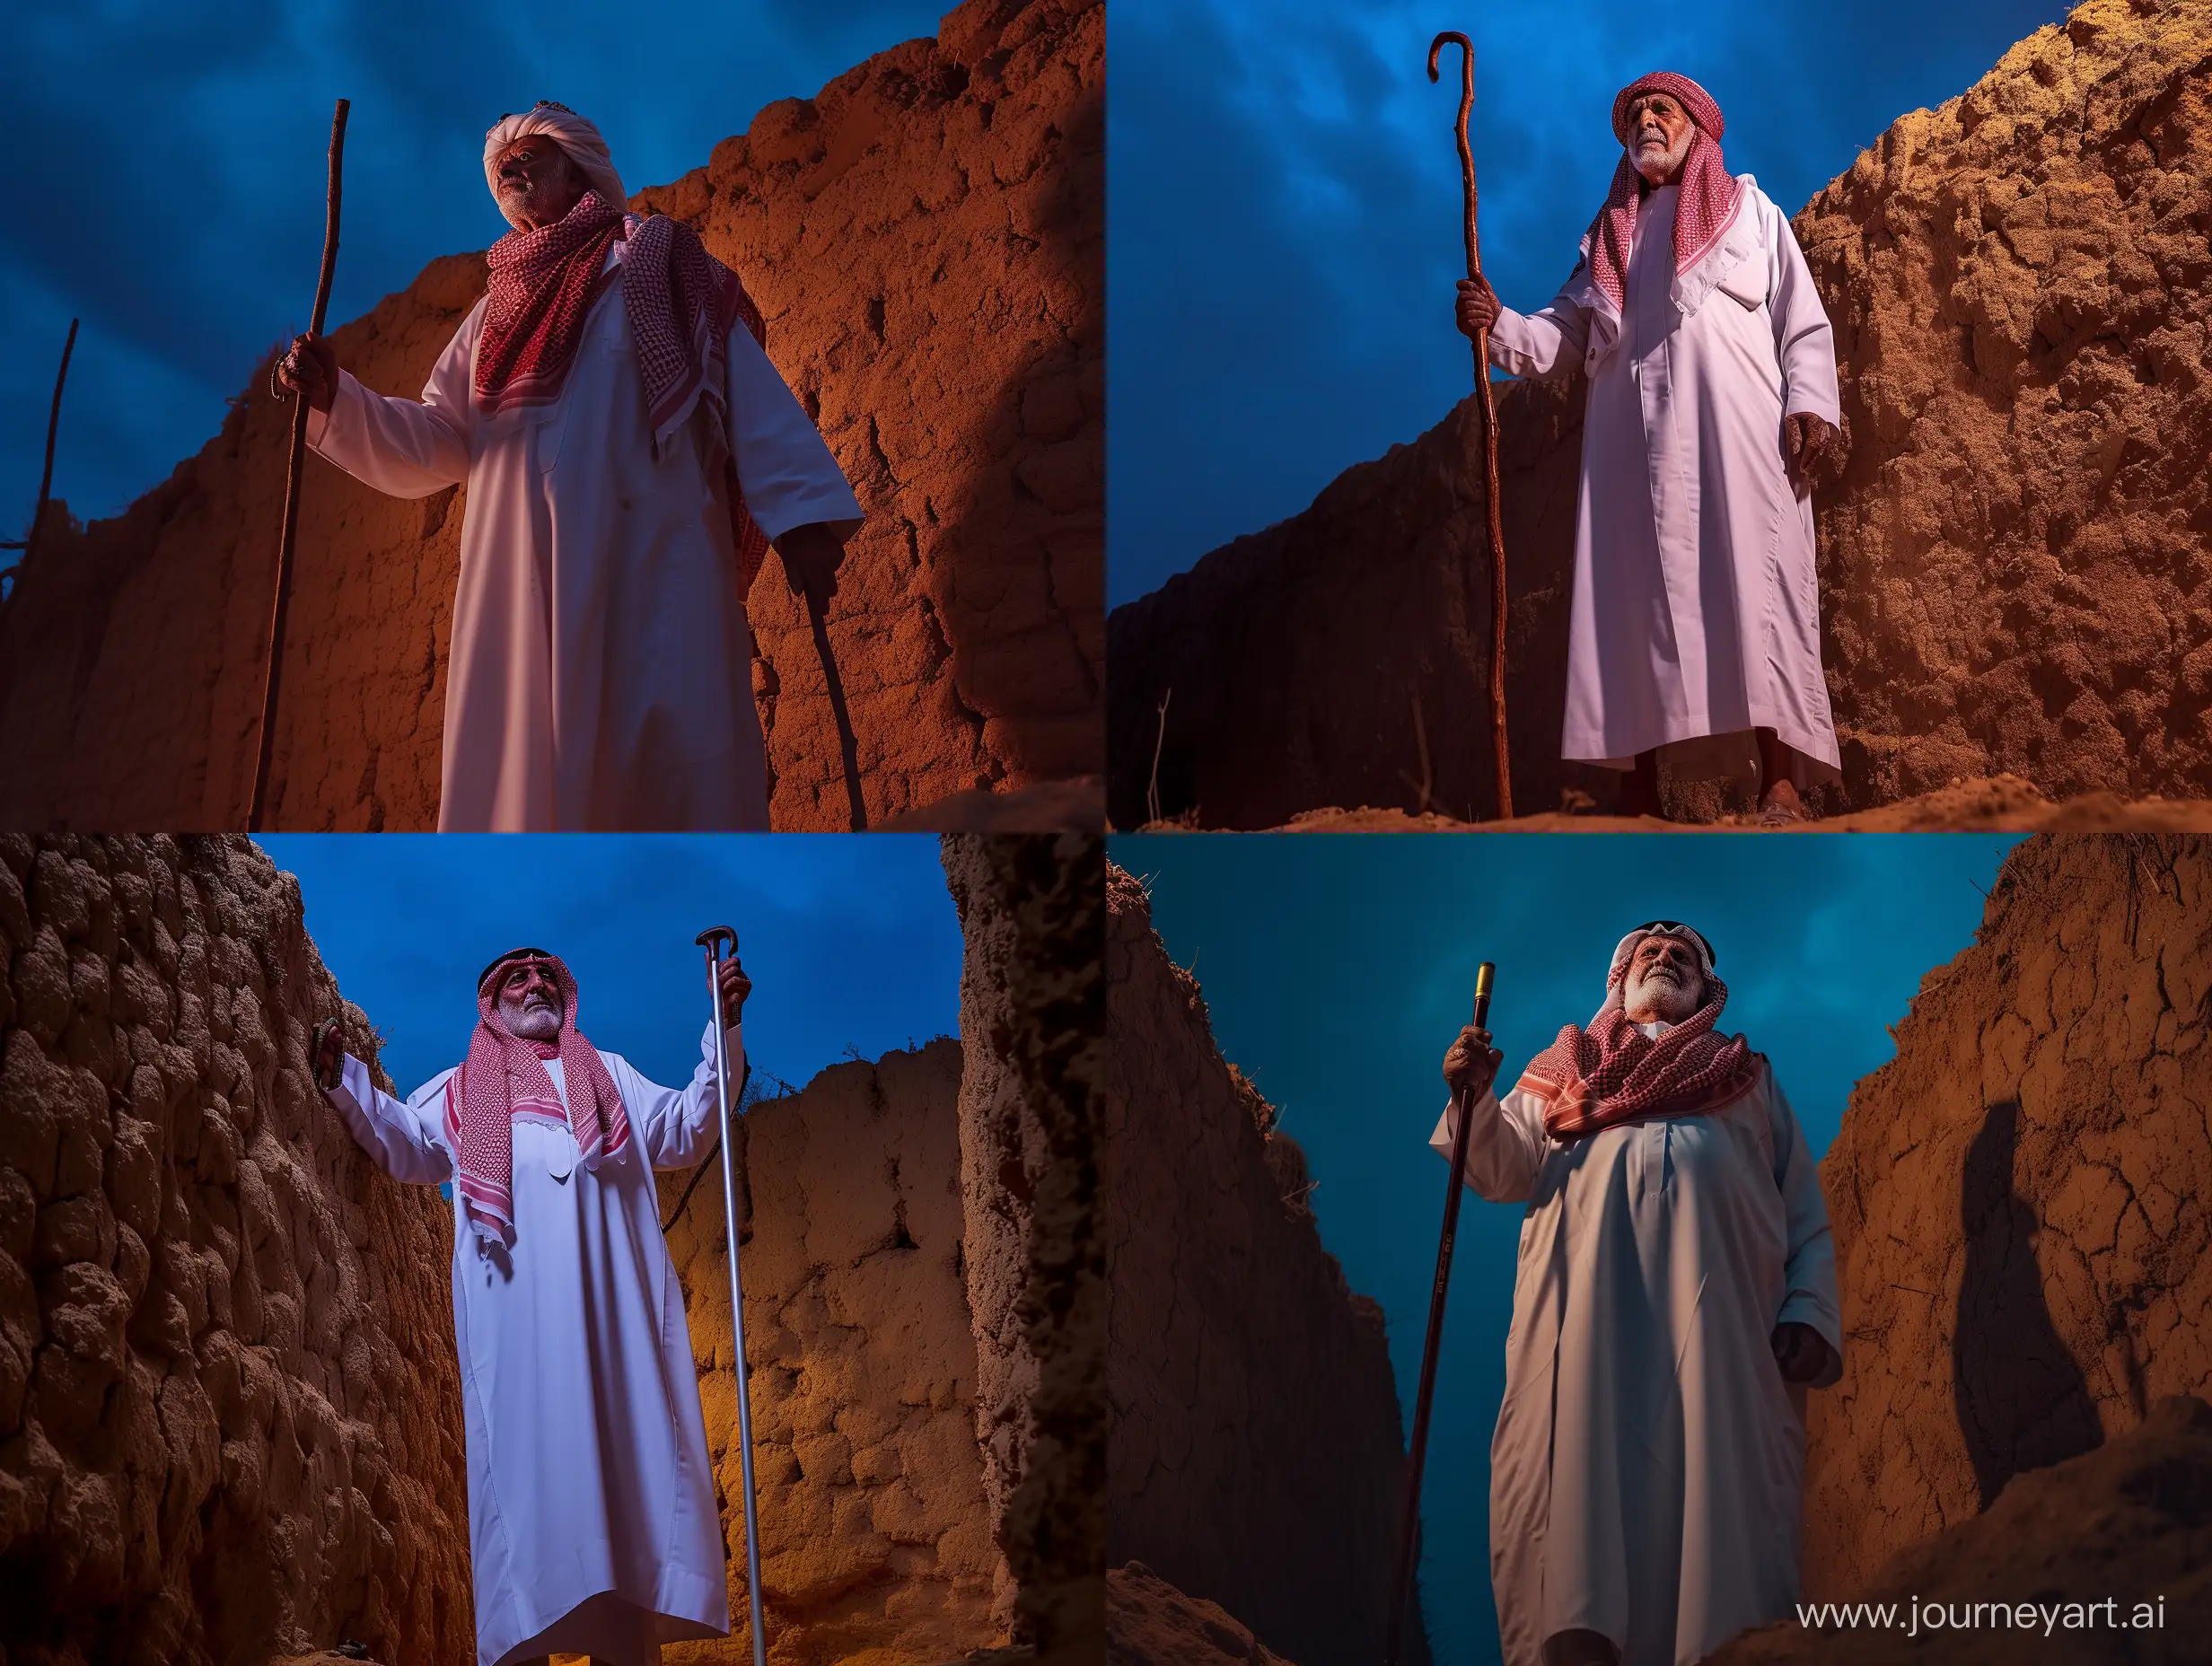 An opening photo of an old Saudi prince wearing the traditional white Saudi dress and a red shemagh, standing in front of a mud wall holding his cane at night time and dim lighting, cinematic and dramatic style with brown tones, and he appears confident, the camera is at a low angle pointing upwards, the sky is blue, and a full-body shot, Nature, shot by ‎‏Panasonic Lumix GH5S, Lumix 12-60mm f/2.8-4.0,